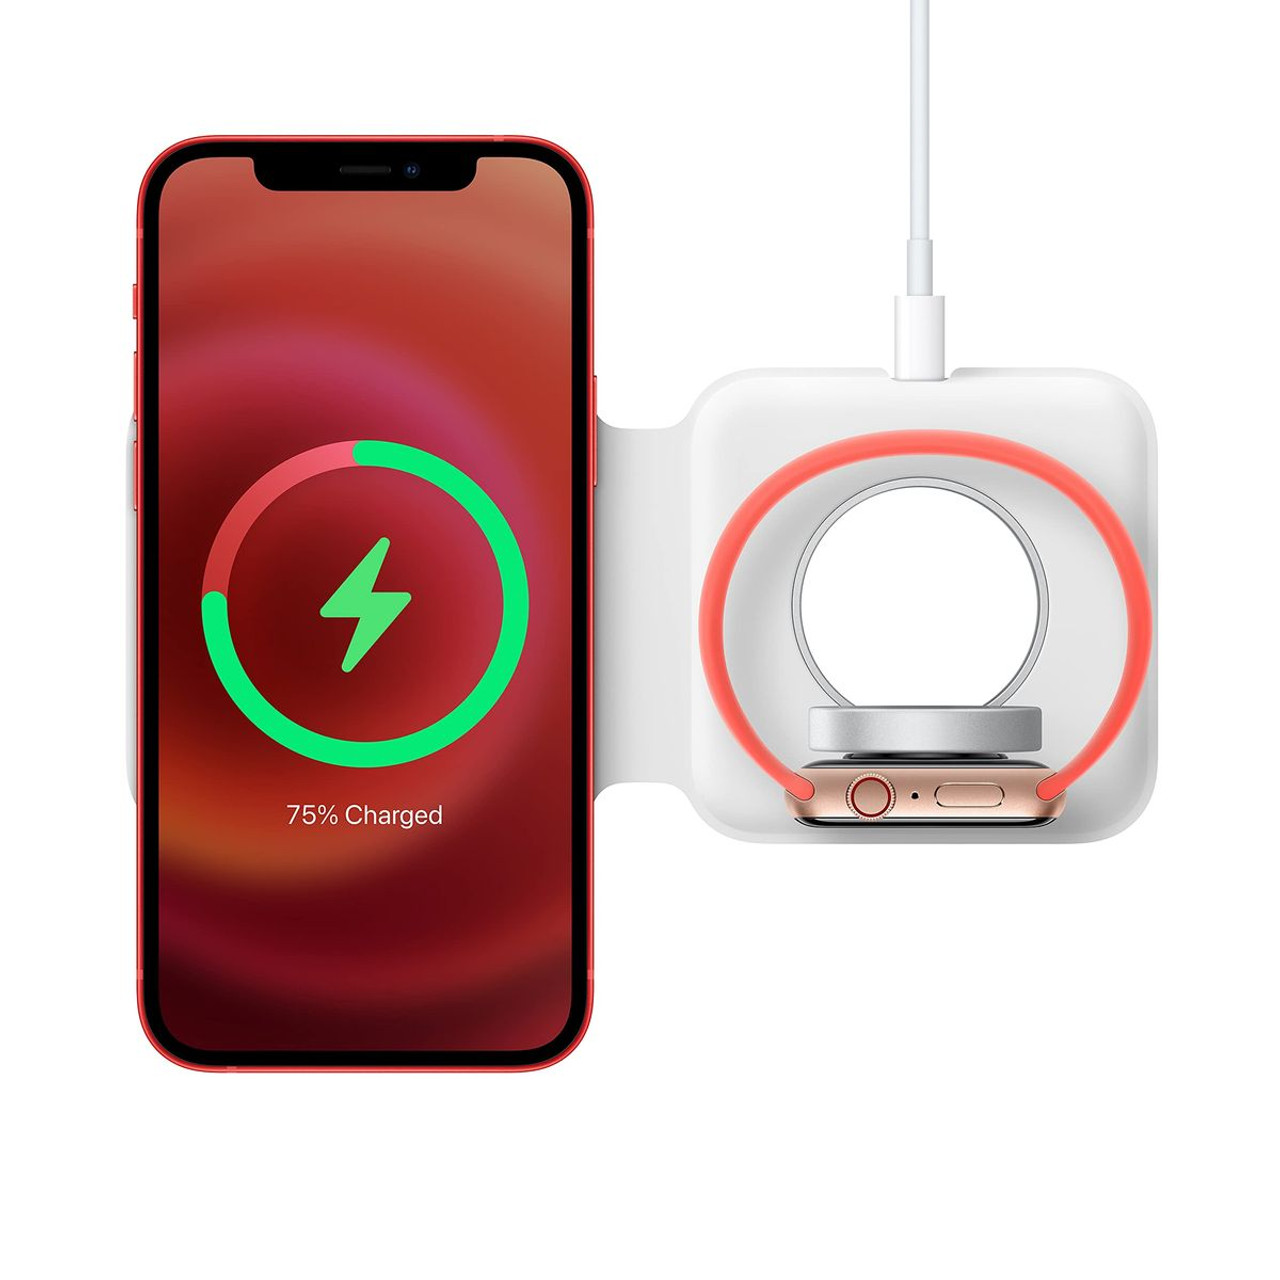 Apple MagSafe Duo Wireless Charger (Type C) product image